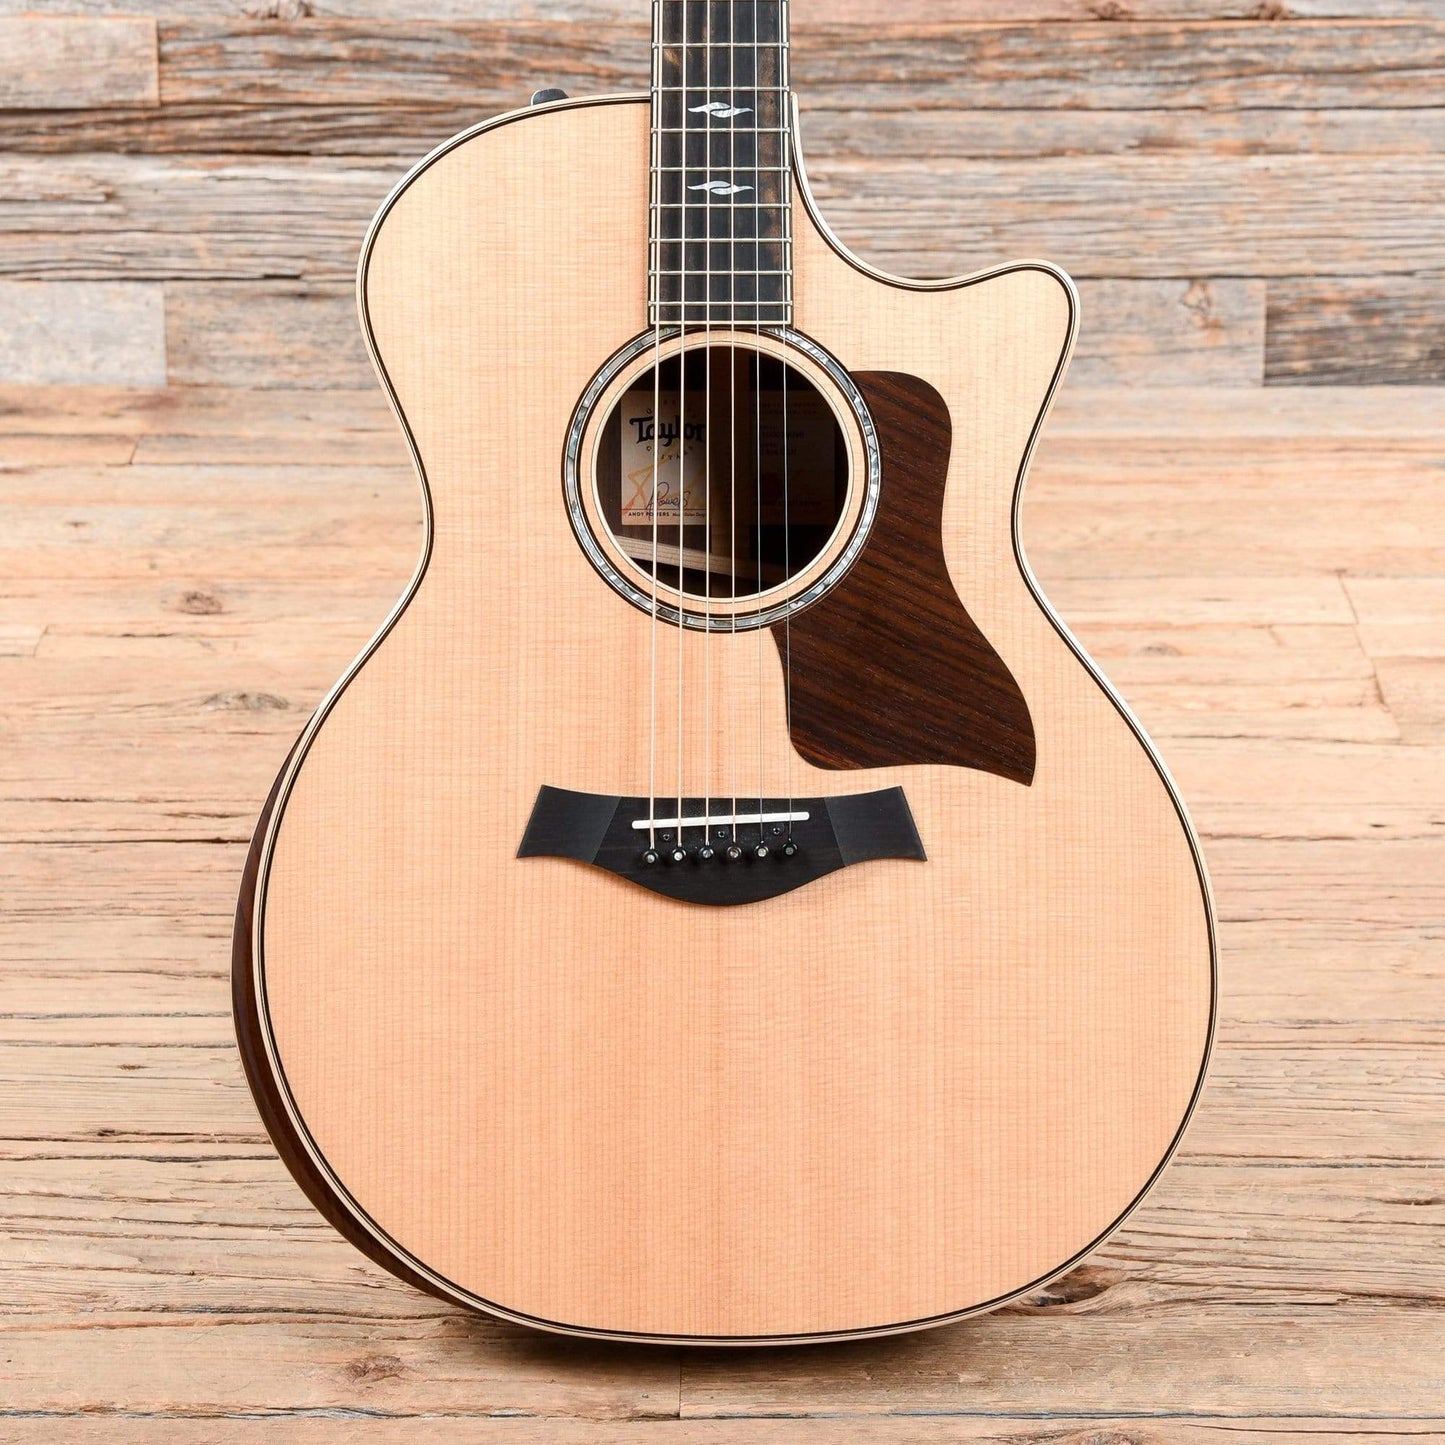 Taylor 814ce Deluxe Grand Auditorium Sitka/Indian Rosewood ES2  w/V-Class Bracing, Armrest & Gotoh Tuners Acoustic Guitars / OM and Auditorium